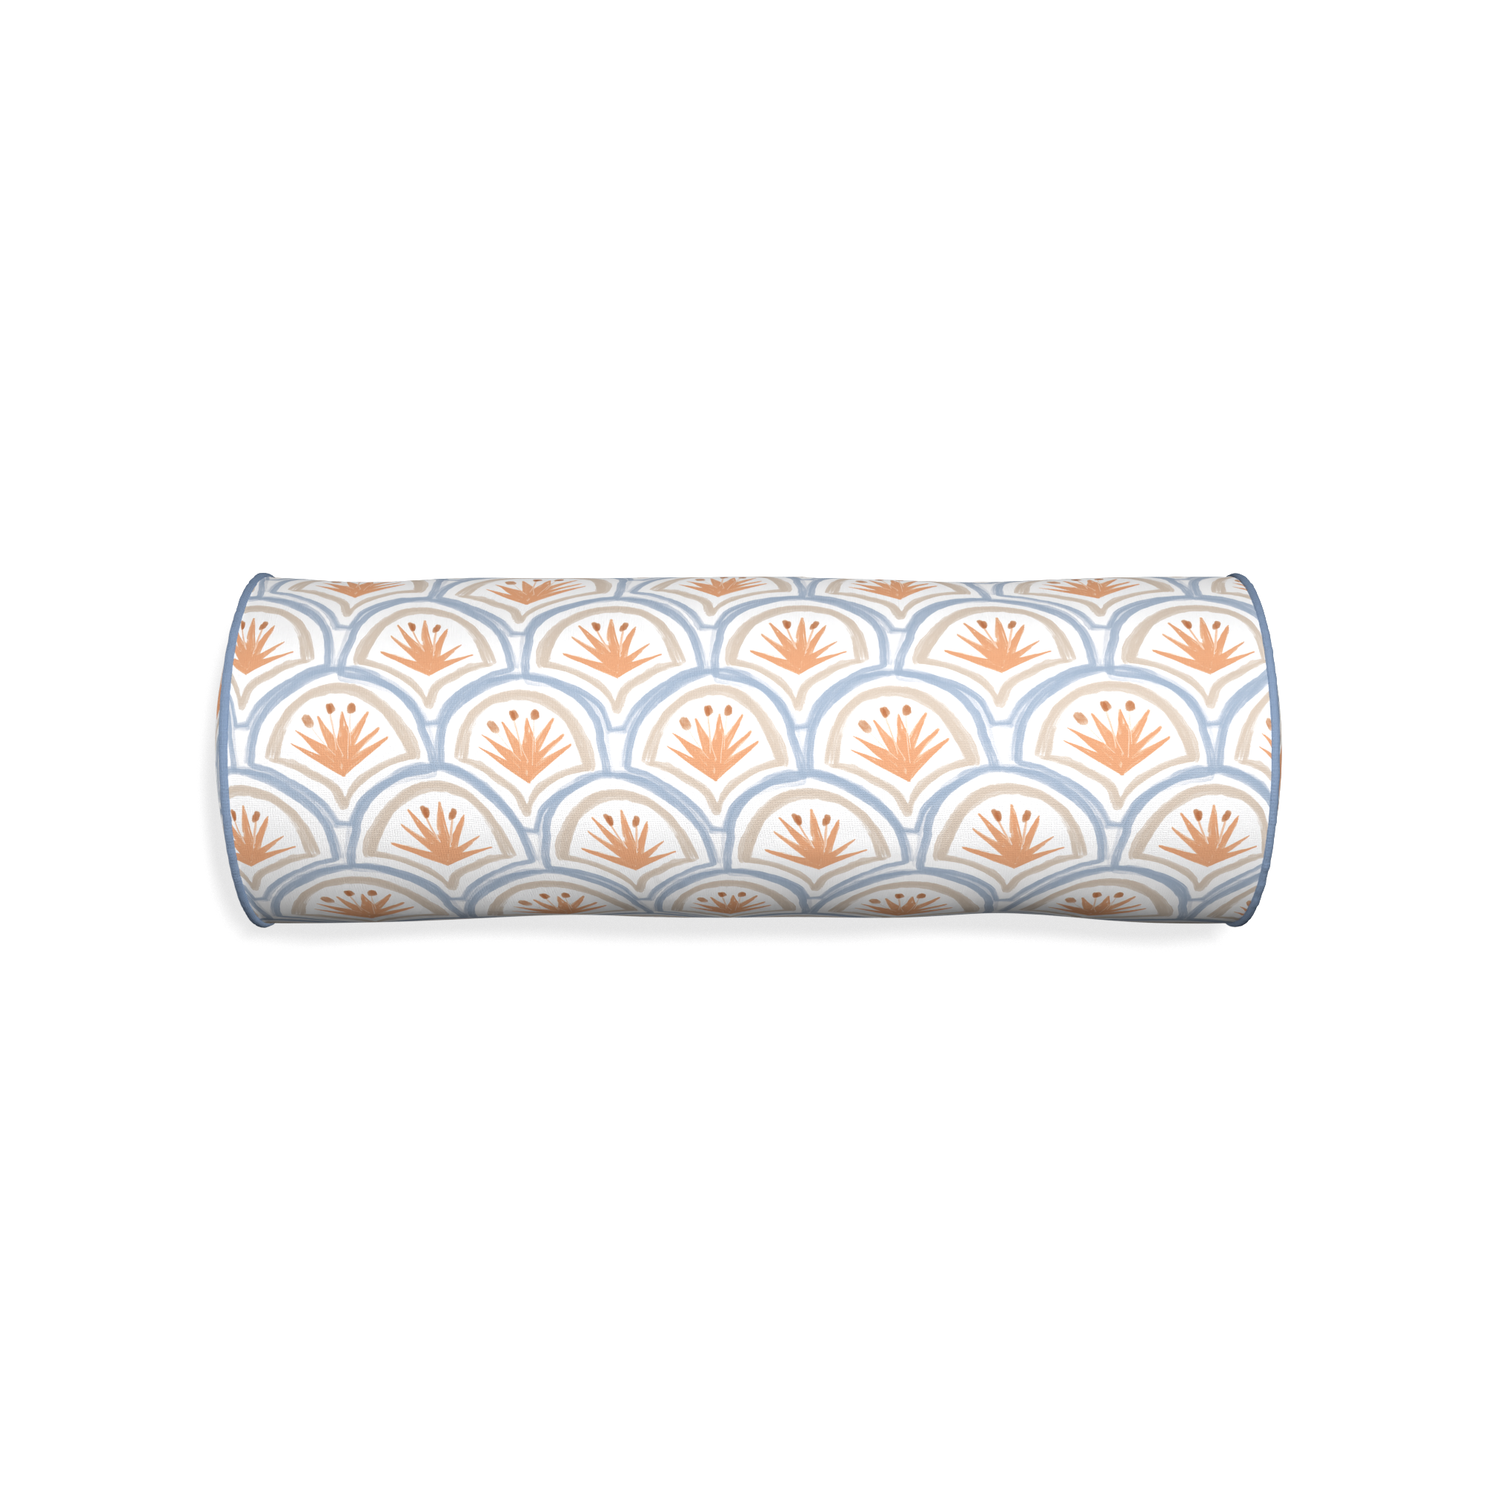 Bolster thatcher apricot custom pillow with sky piping on white background